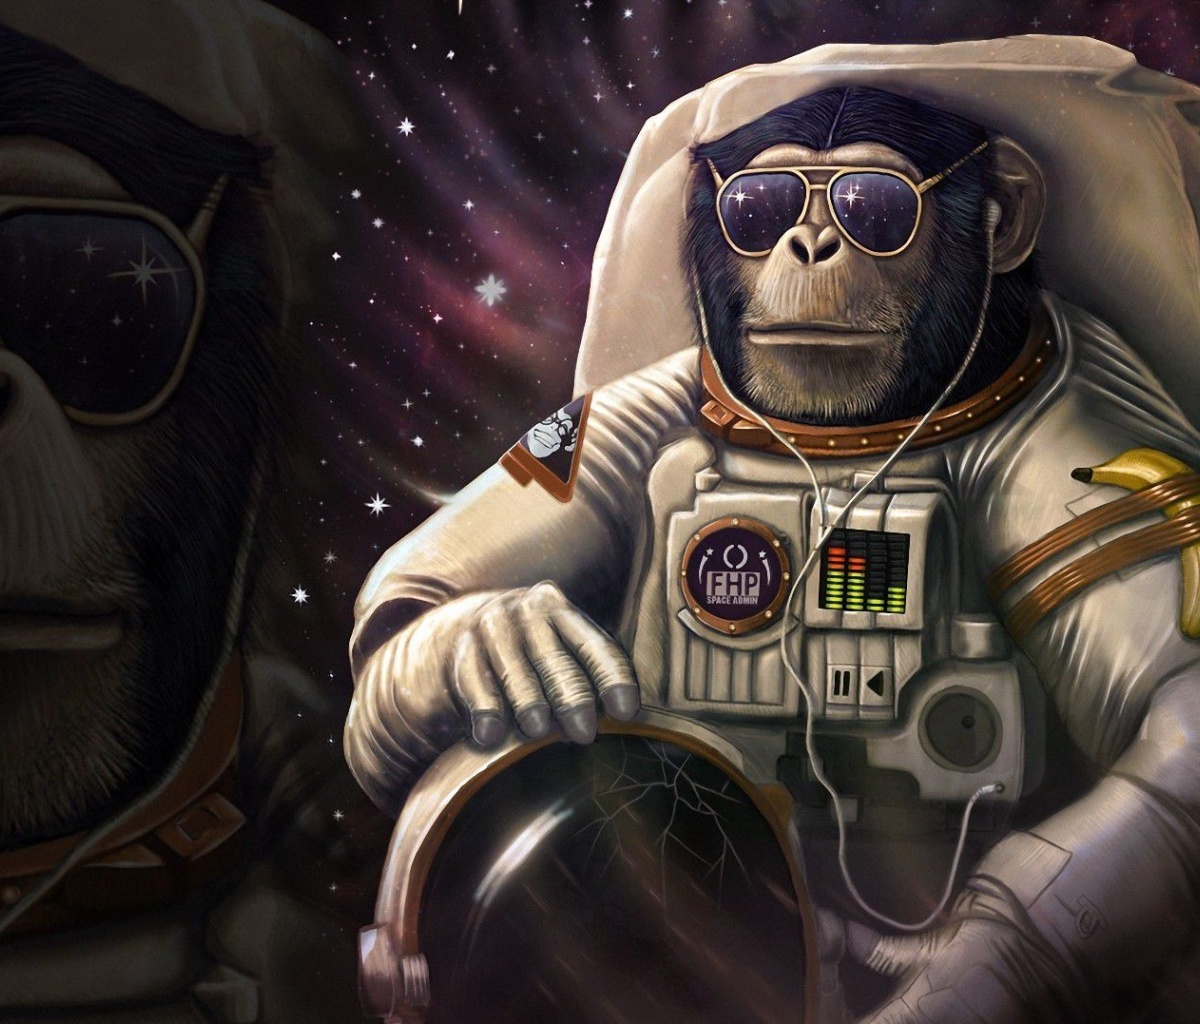 Das Monkeys and apes in space Wallpaper 1200x1024